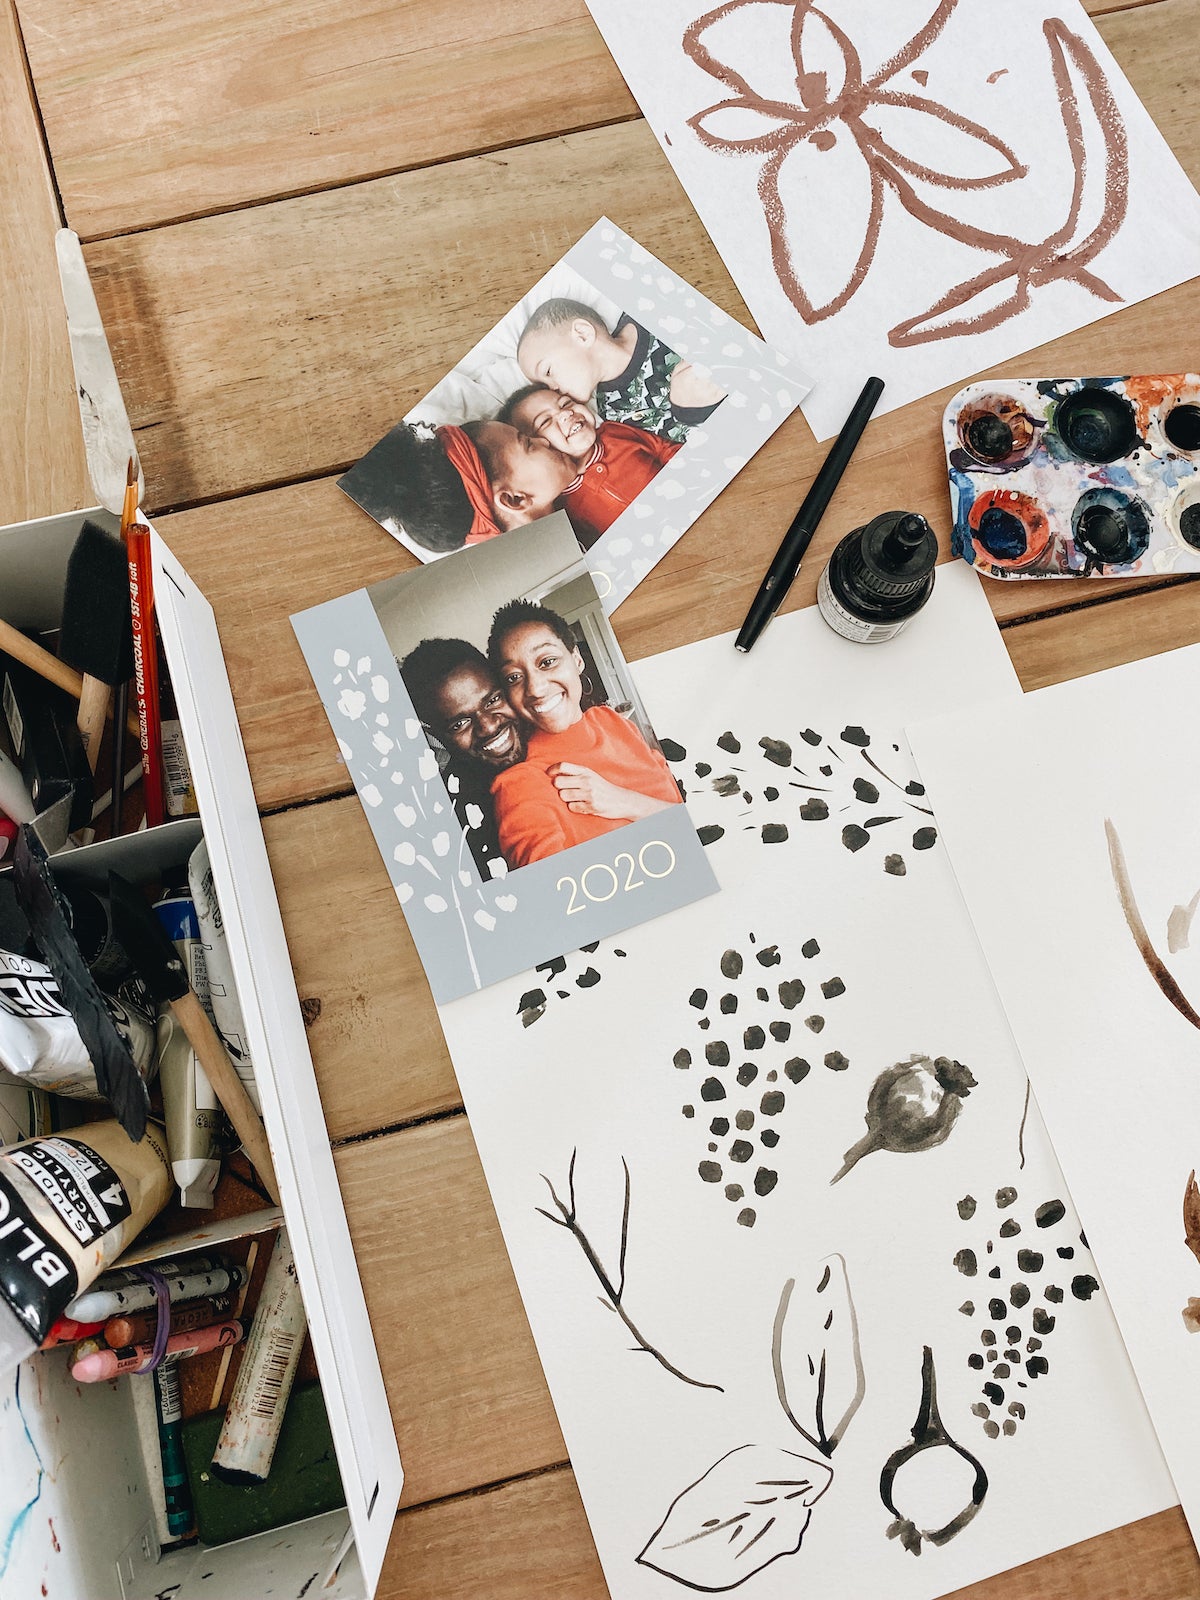 Holiday cards and drawings spread out on a studio table with art supplies